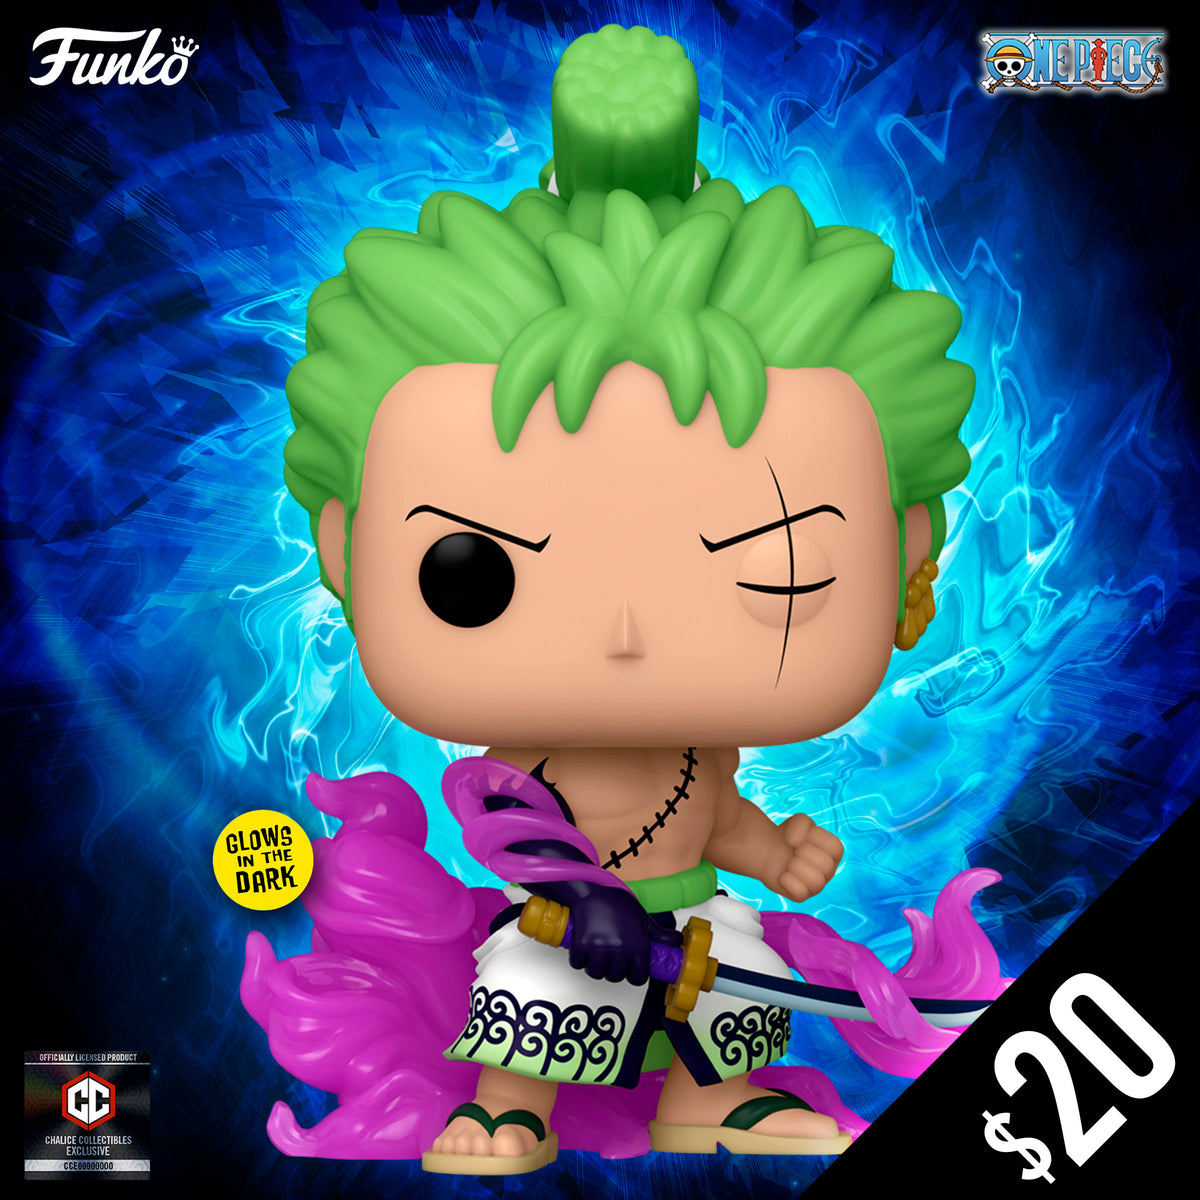 FunkoFinderz  Funko Pop! News & More! on Instagram: Available Now on Funko  Shop Chalice Collectibles Exclusive Glow in the Dark Zoro (Enma) Funko Pop!  Vinyl  #OnePiece #Funko #FunkoPop  #FunkoPopVinyl 🔗